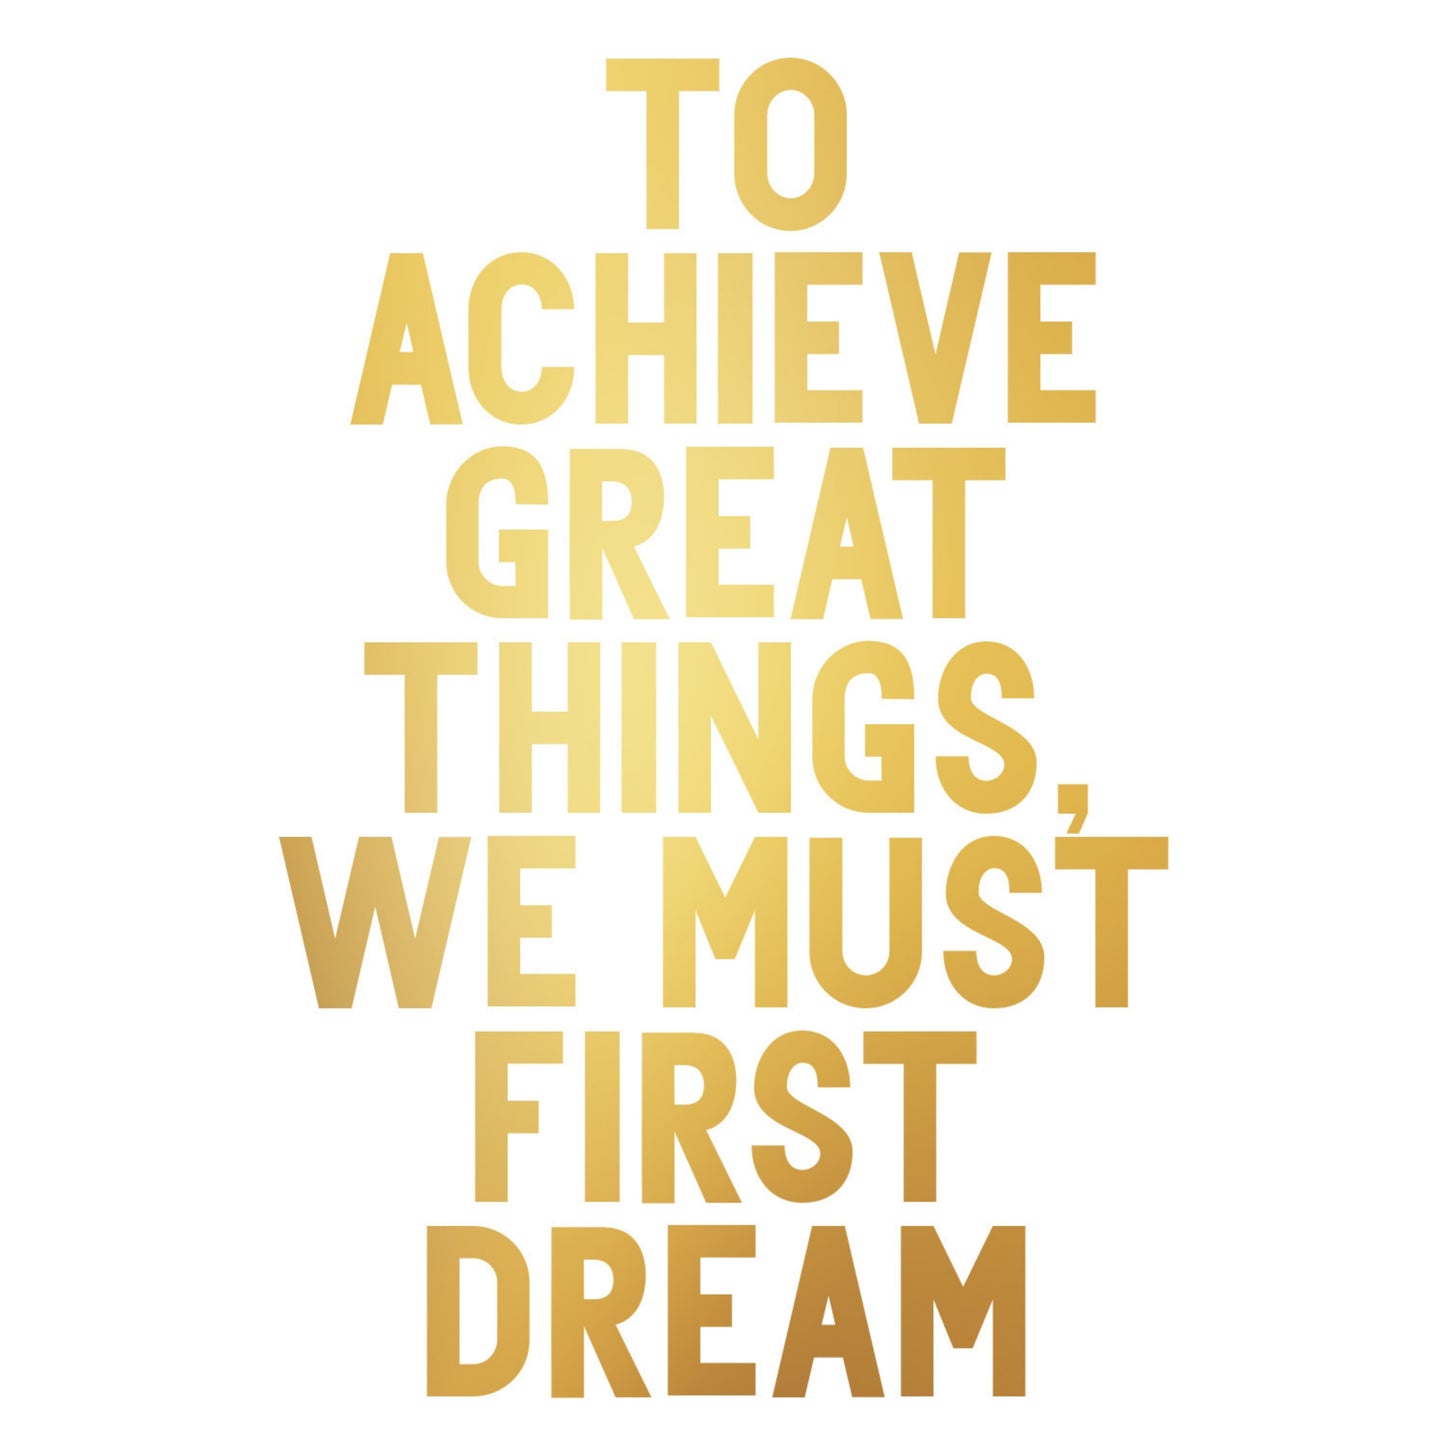 "To Achieve Great Things, We Must First Dream" Famous Quote by Coco Chanel In Gold, Printable Art